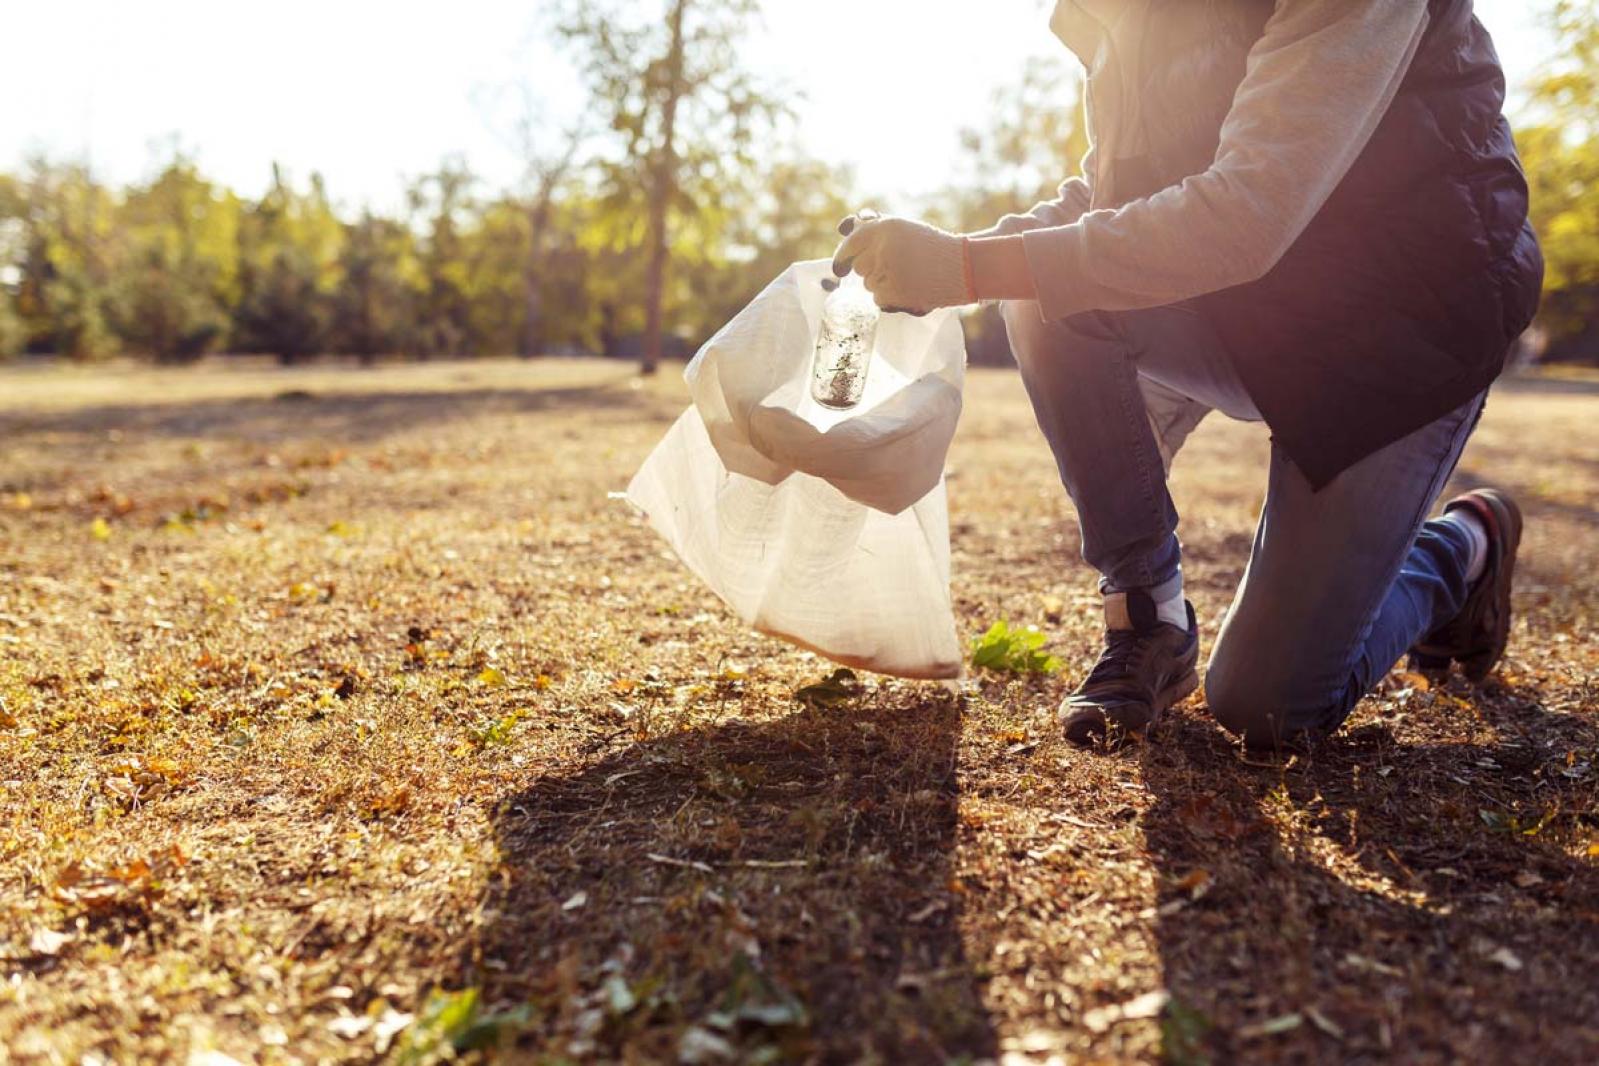 Man picking up trash in a field